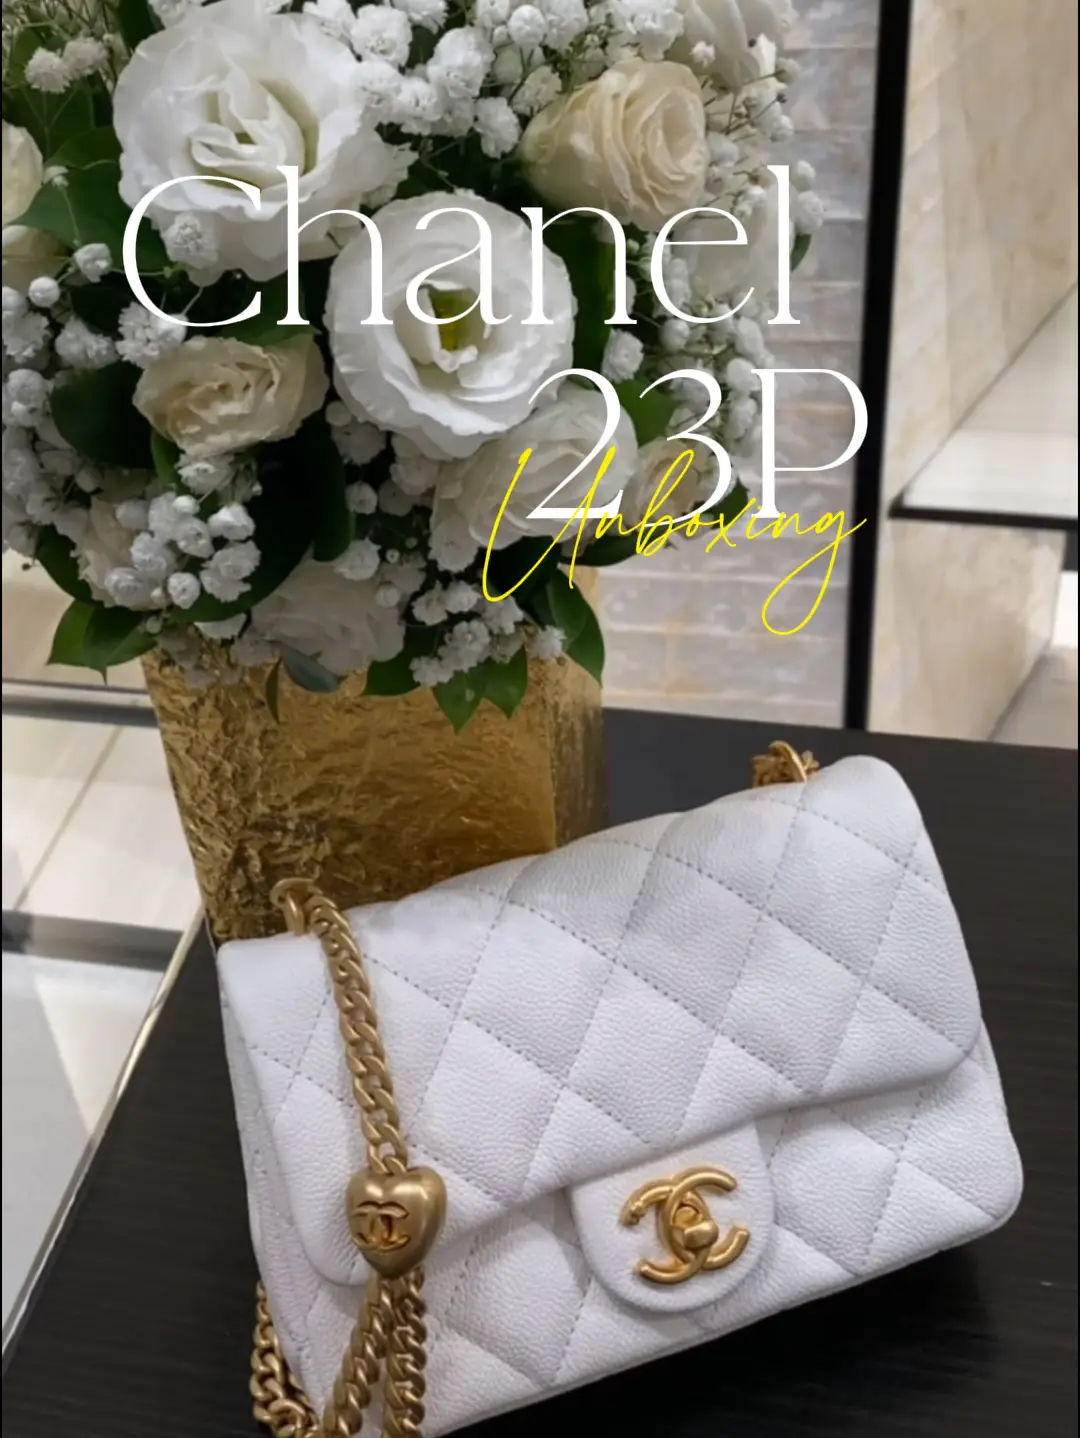 Chanel 23P Bag Unboxing🤍, Video published by etherealpeonies